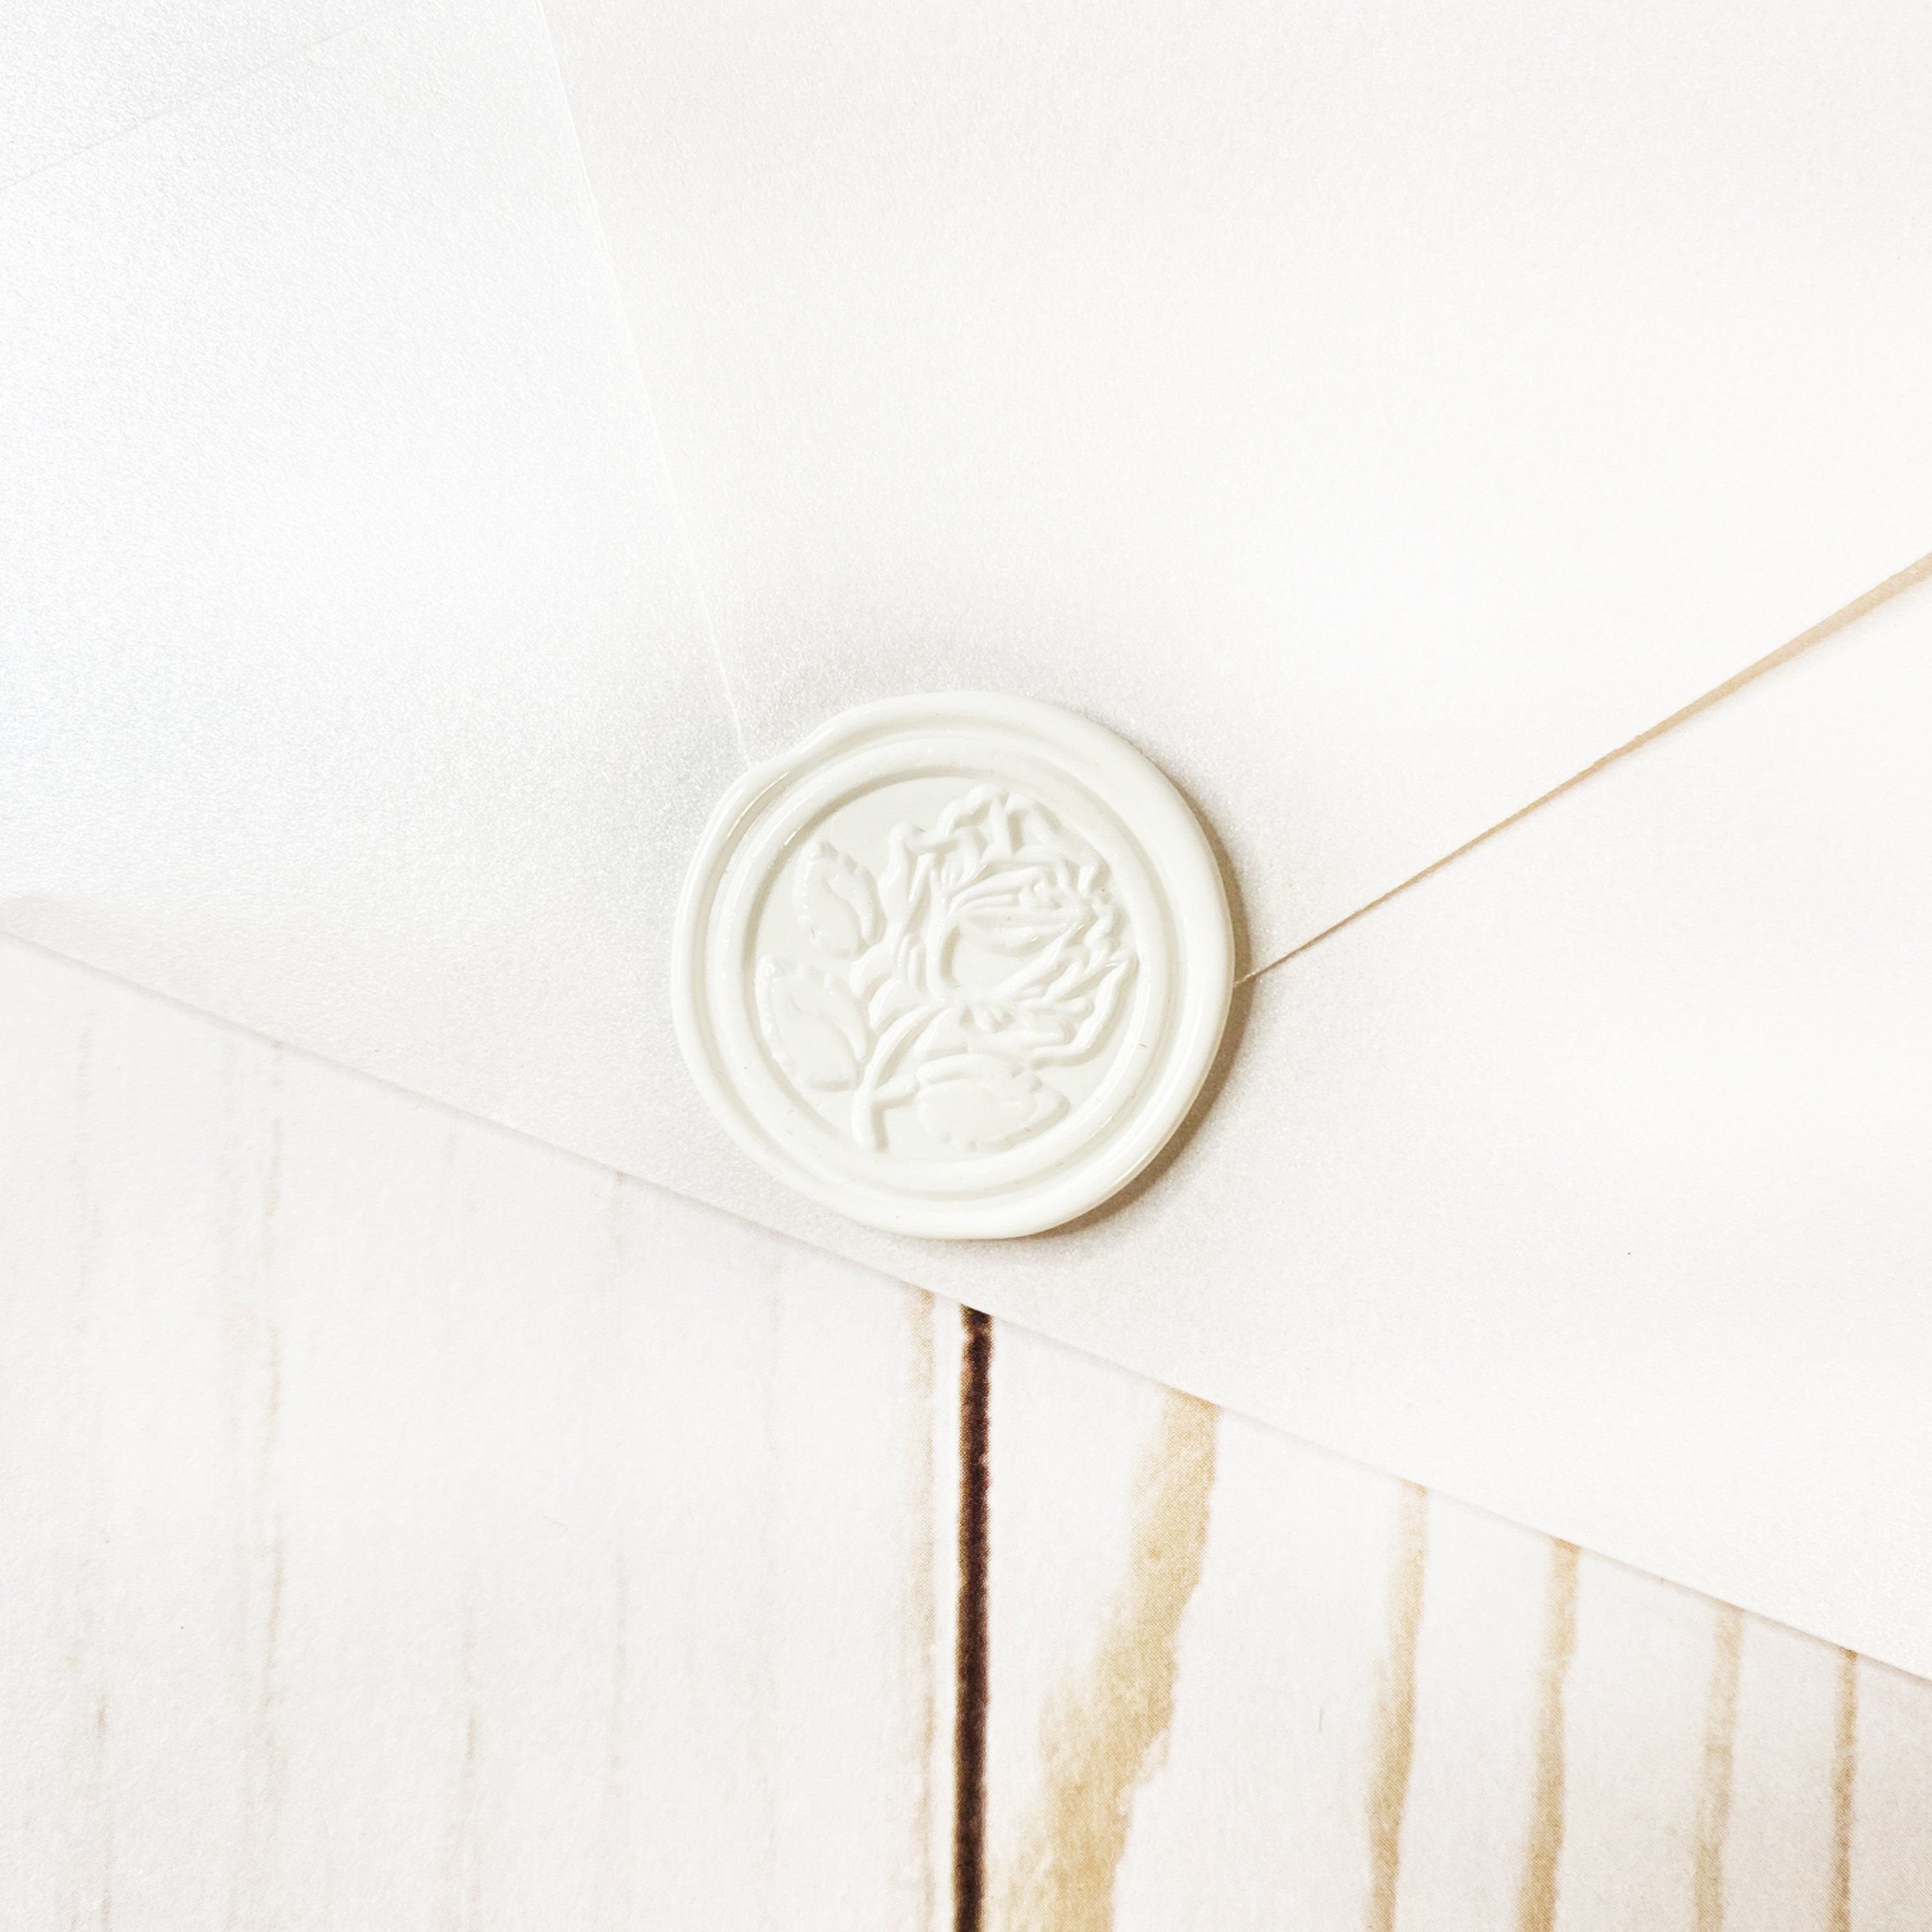 VOOSEYHOME Elegant Rose Wax Seal Stamp with Rosewood Handle, Decorating on  Invitation Envelope Sealer Letter Poster Card Snail Mail Gift Packing for